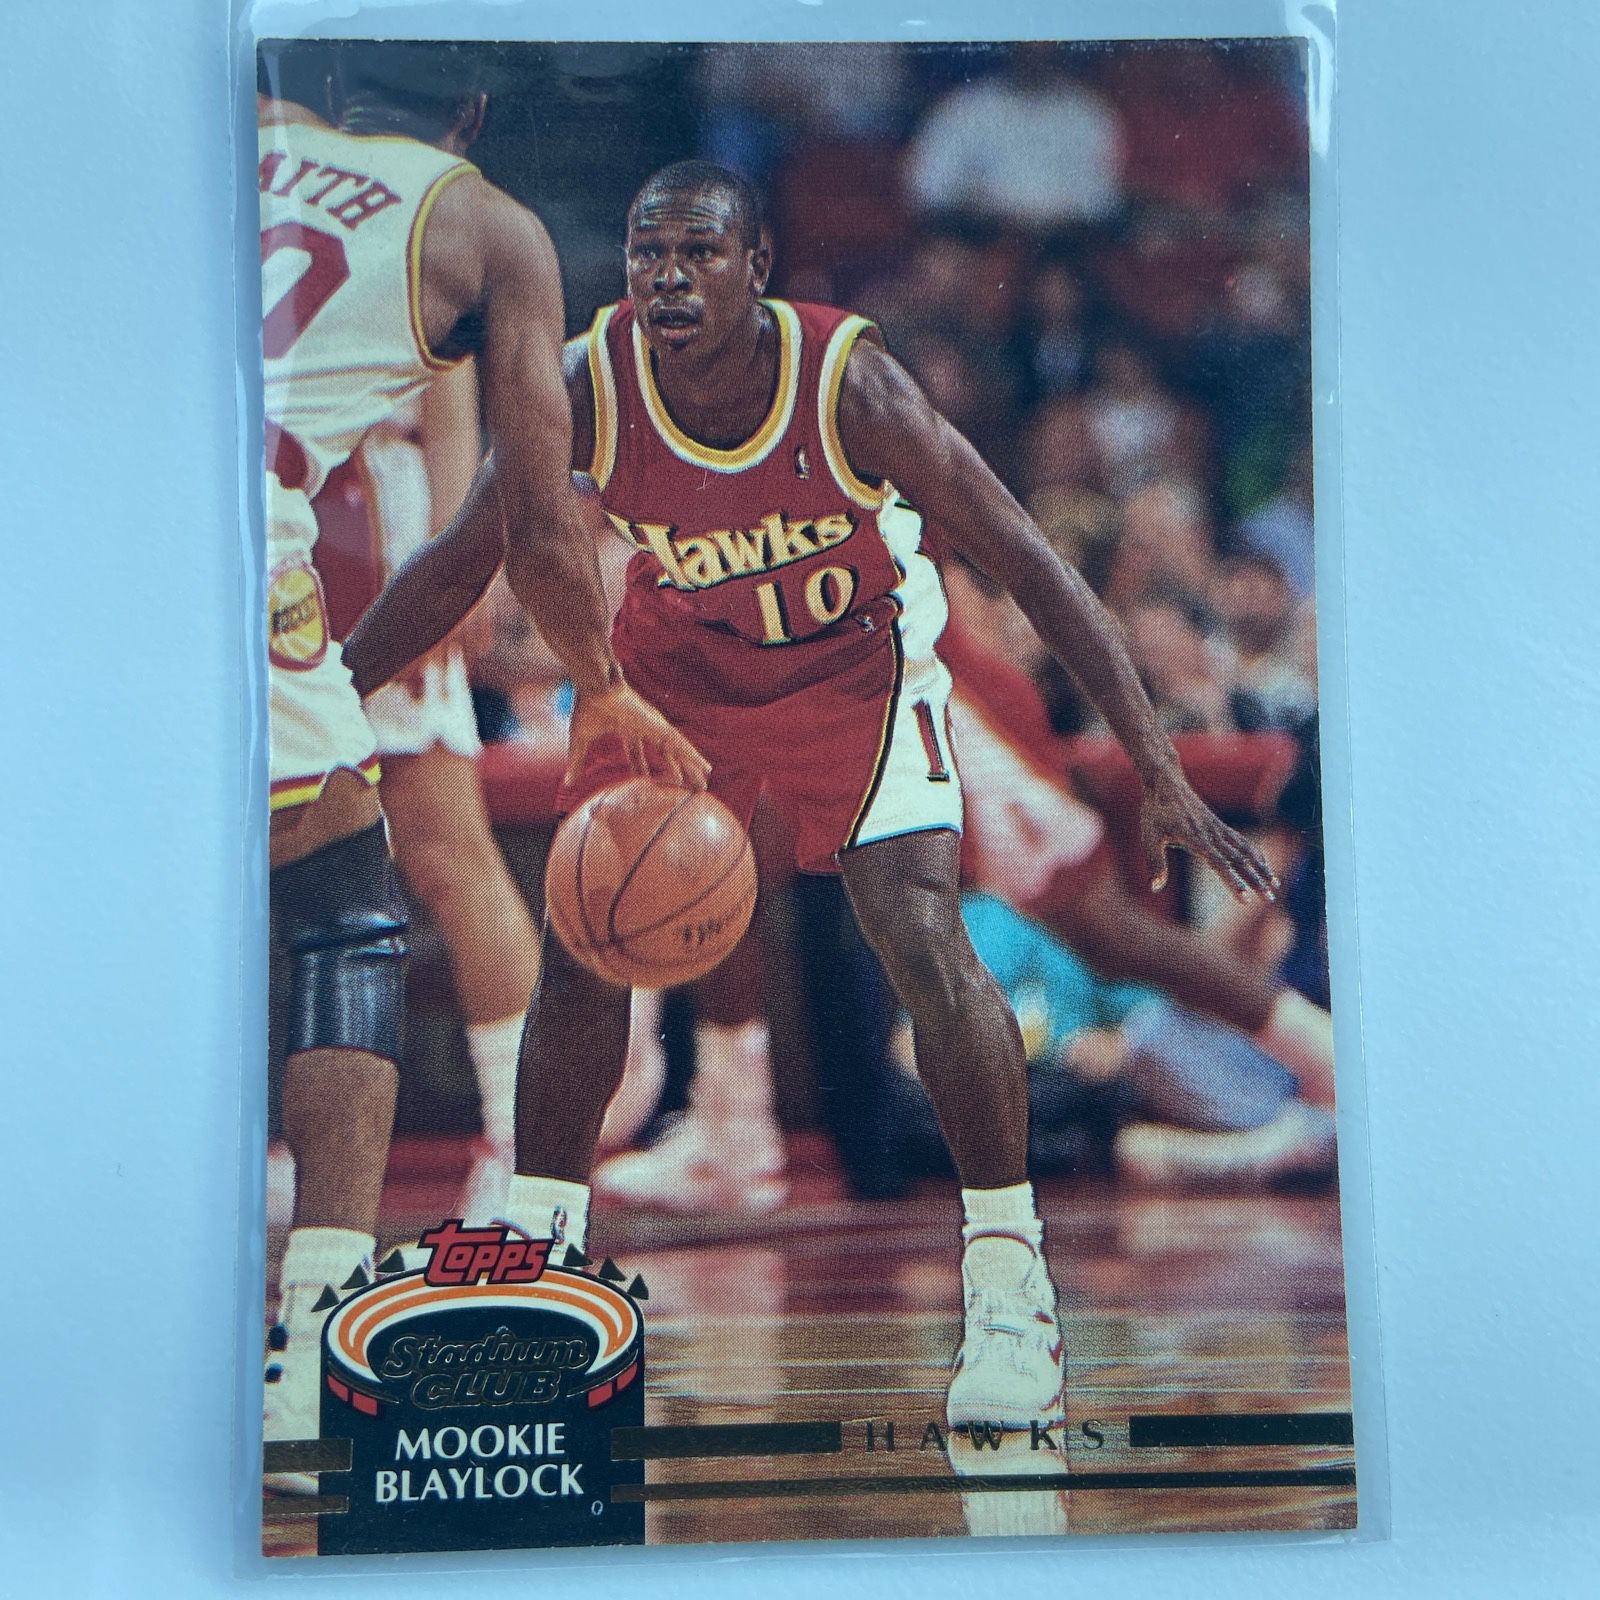 1992 Topps Stadium Club Mookie Blaylock Rookie Card for Sale in Kyle, TX -  OfferUp